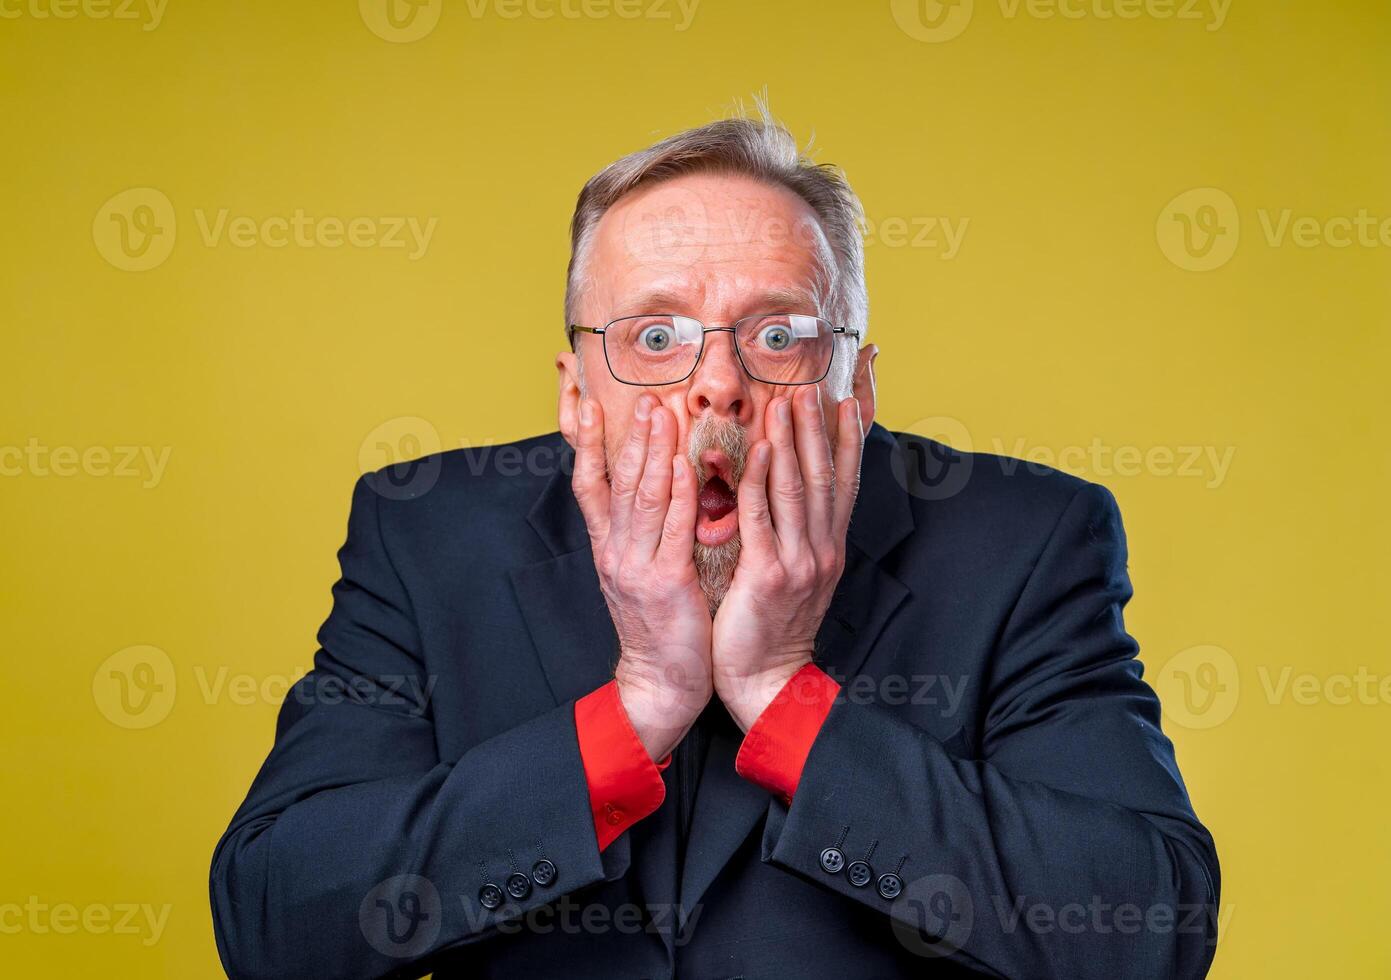 Scared frightened senior man. Frightaned of something. Man covers widely opened mouth with both hands. Displeased surprised expression. Man dressed in suit. Negative emotions. photo